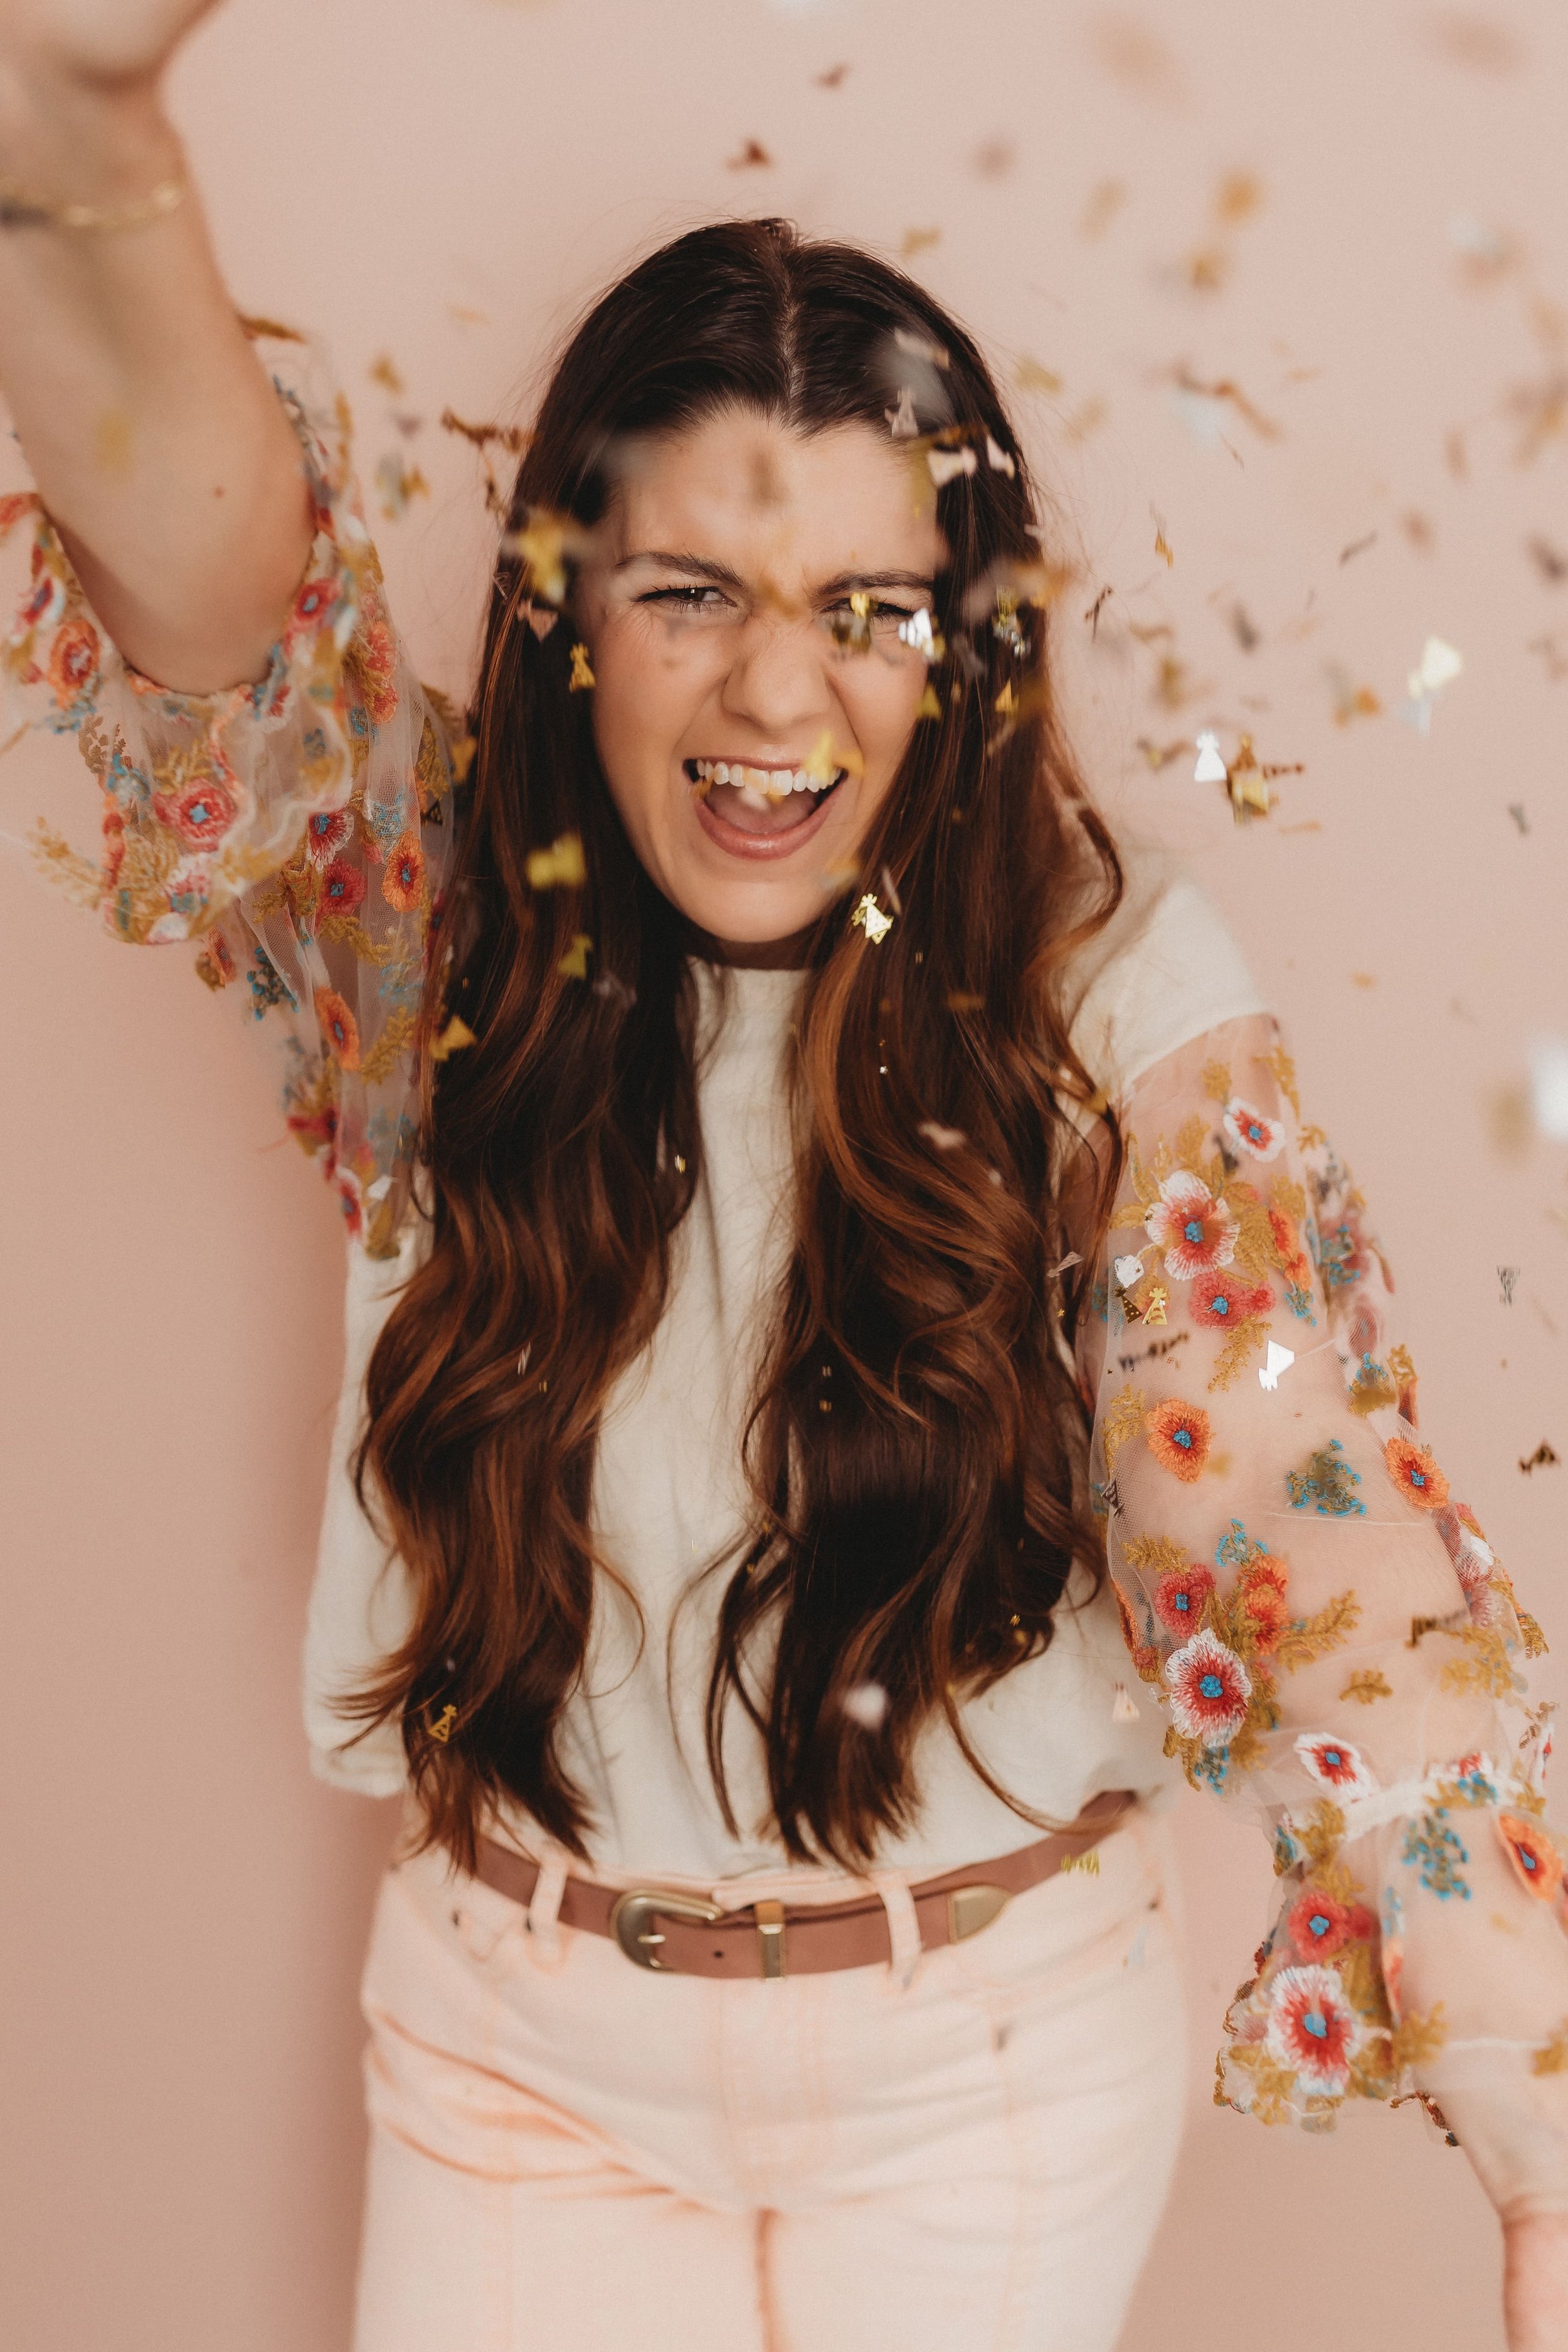  hannah smiles as she throws confetti during her brand photos 